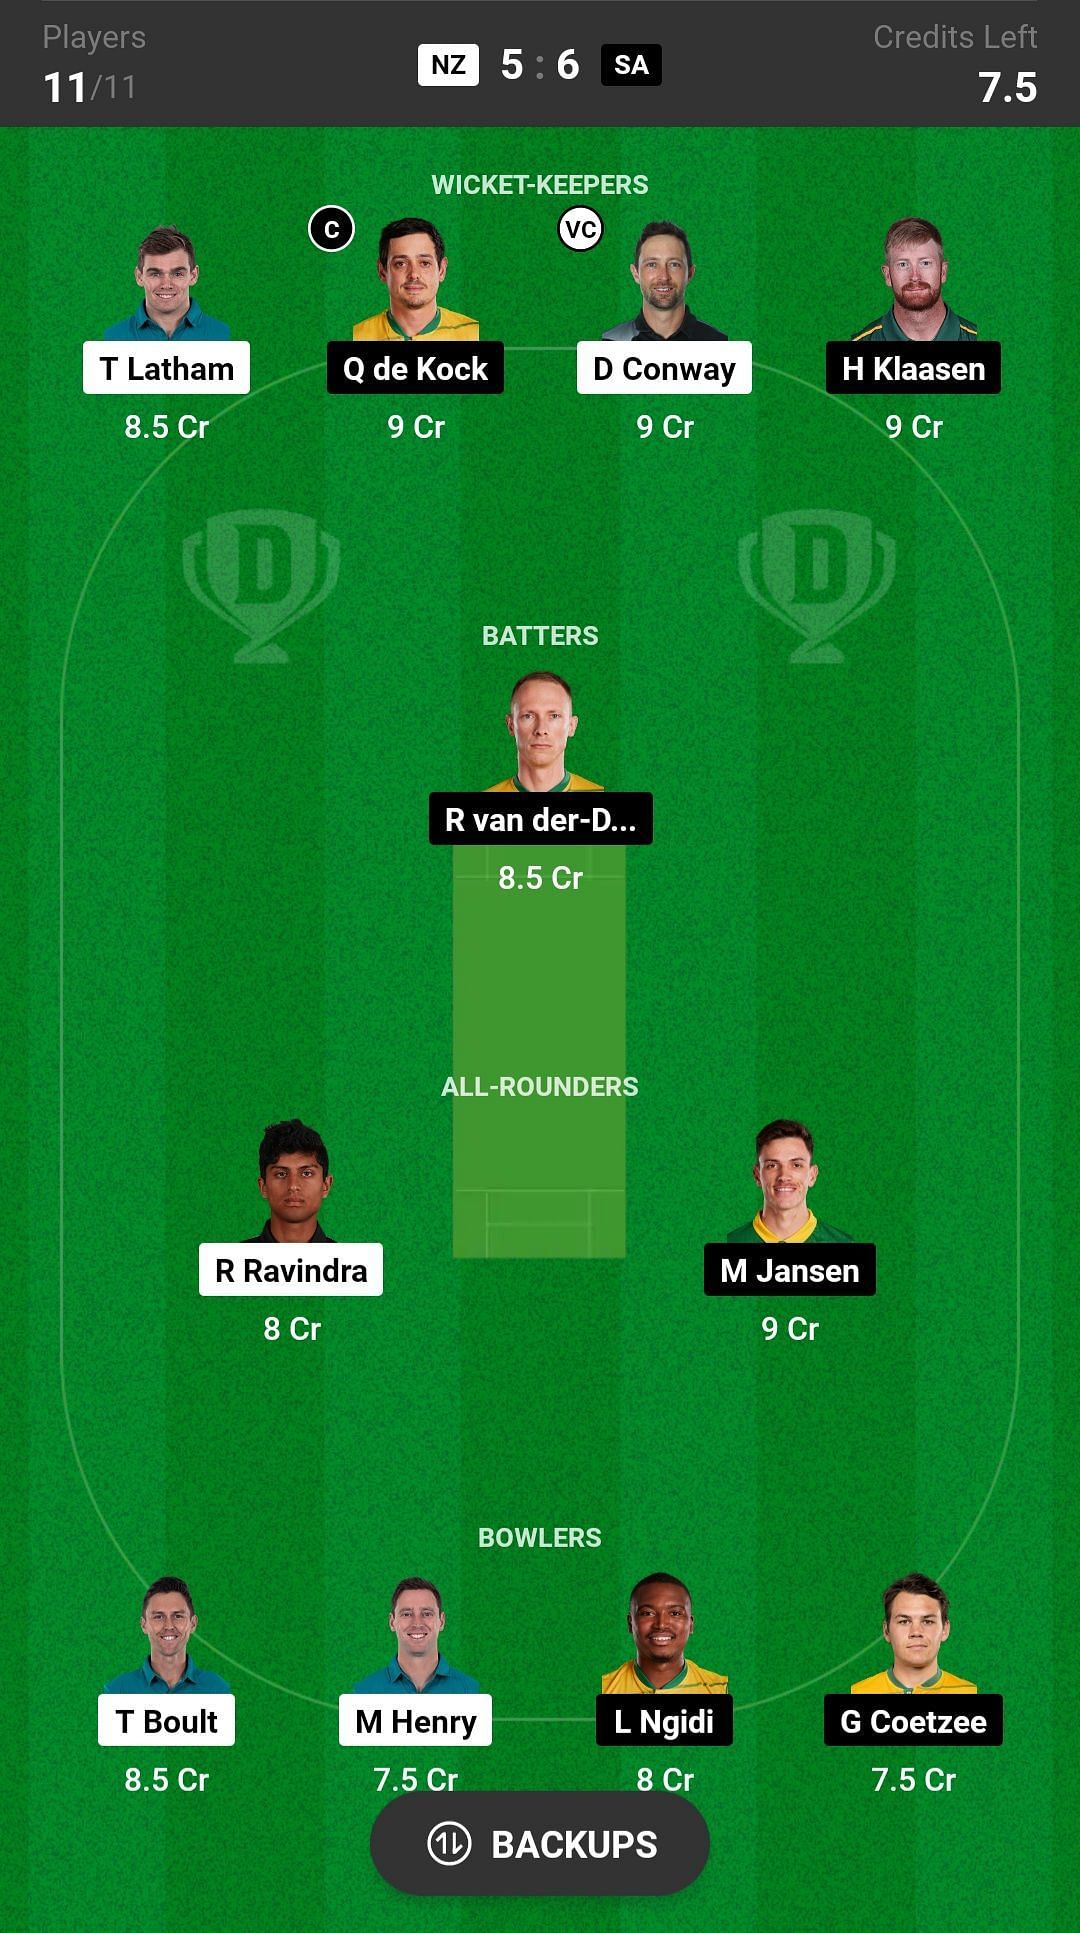 South Africa vs New Zealand Dream11 Fantasy suggestion #2 - Grand League